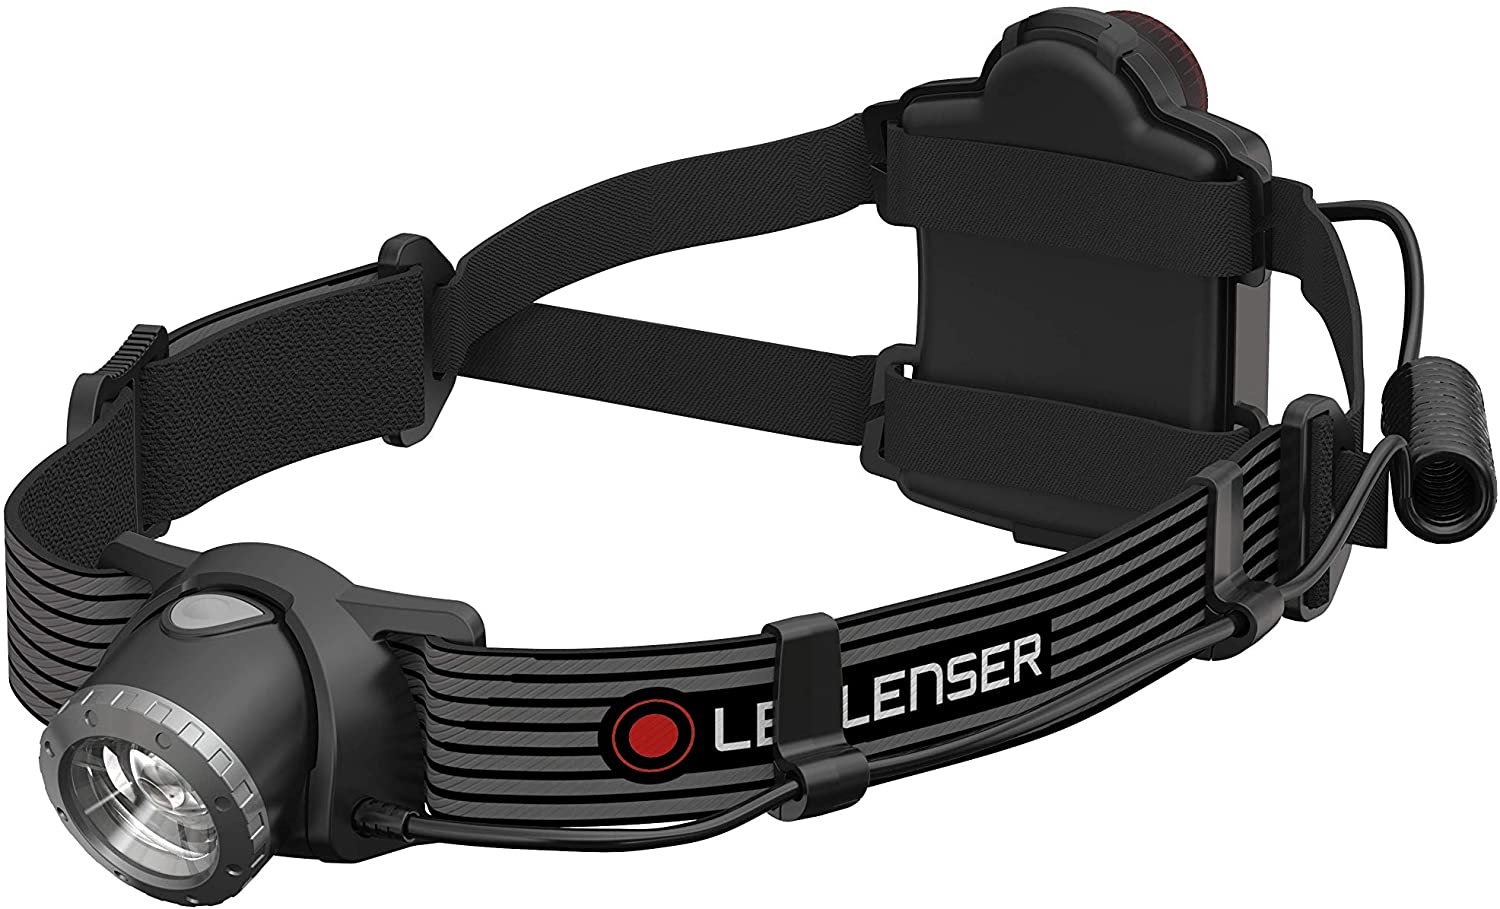 H7R SE Rechargeable Head Torch Special Edition